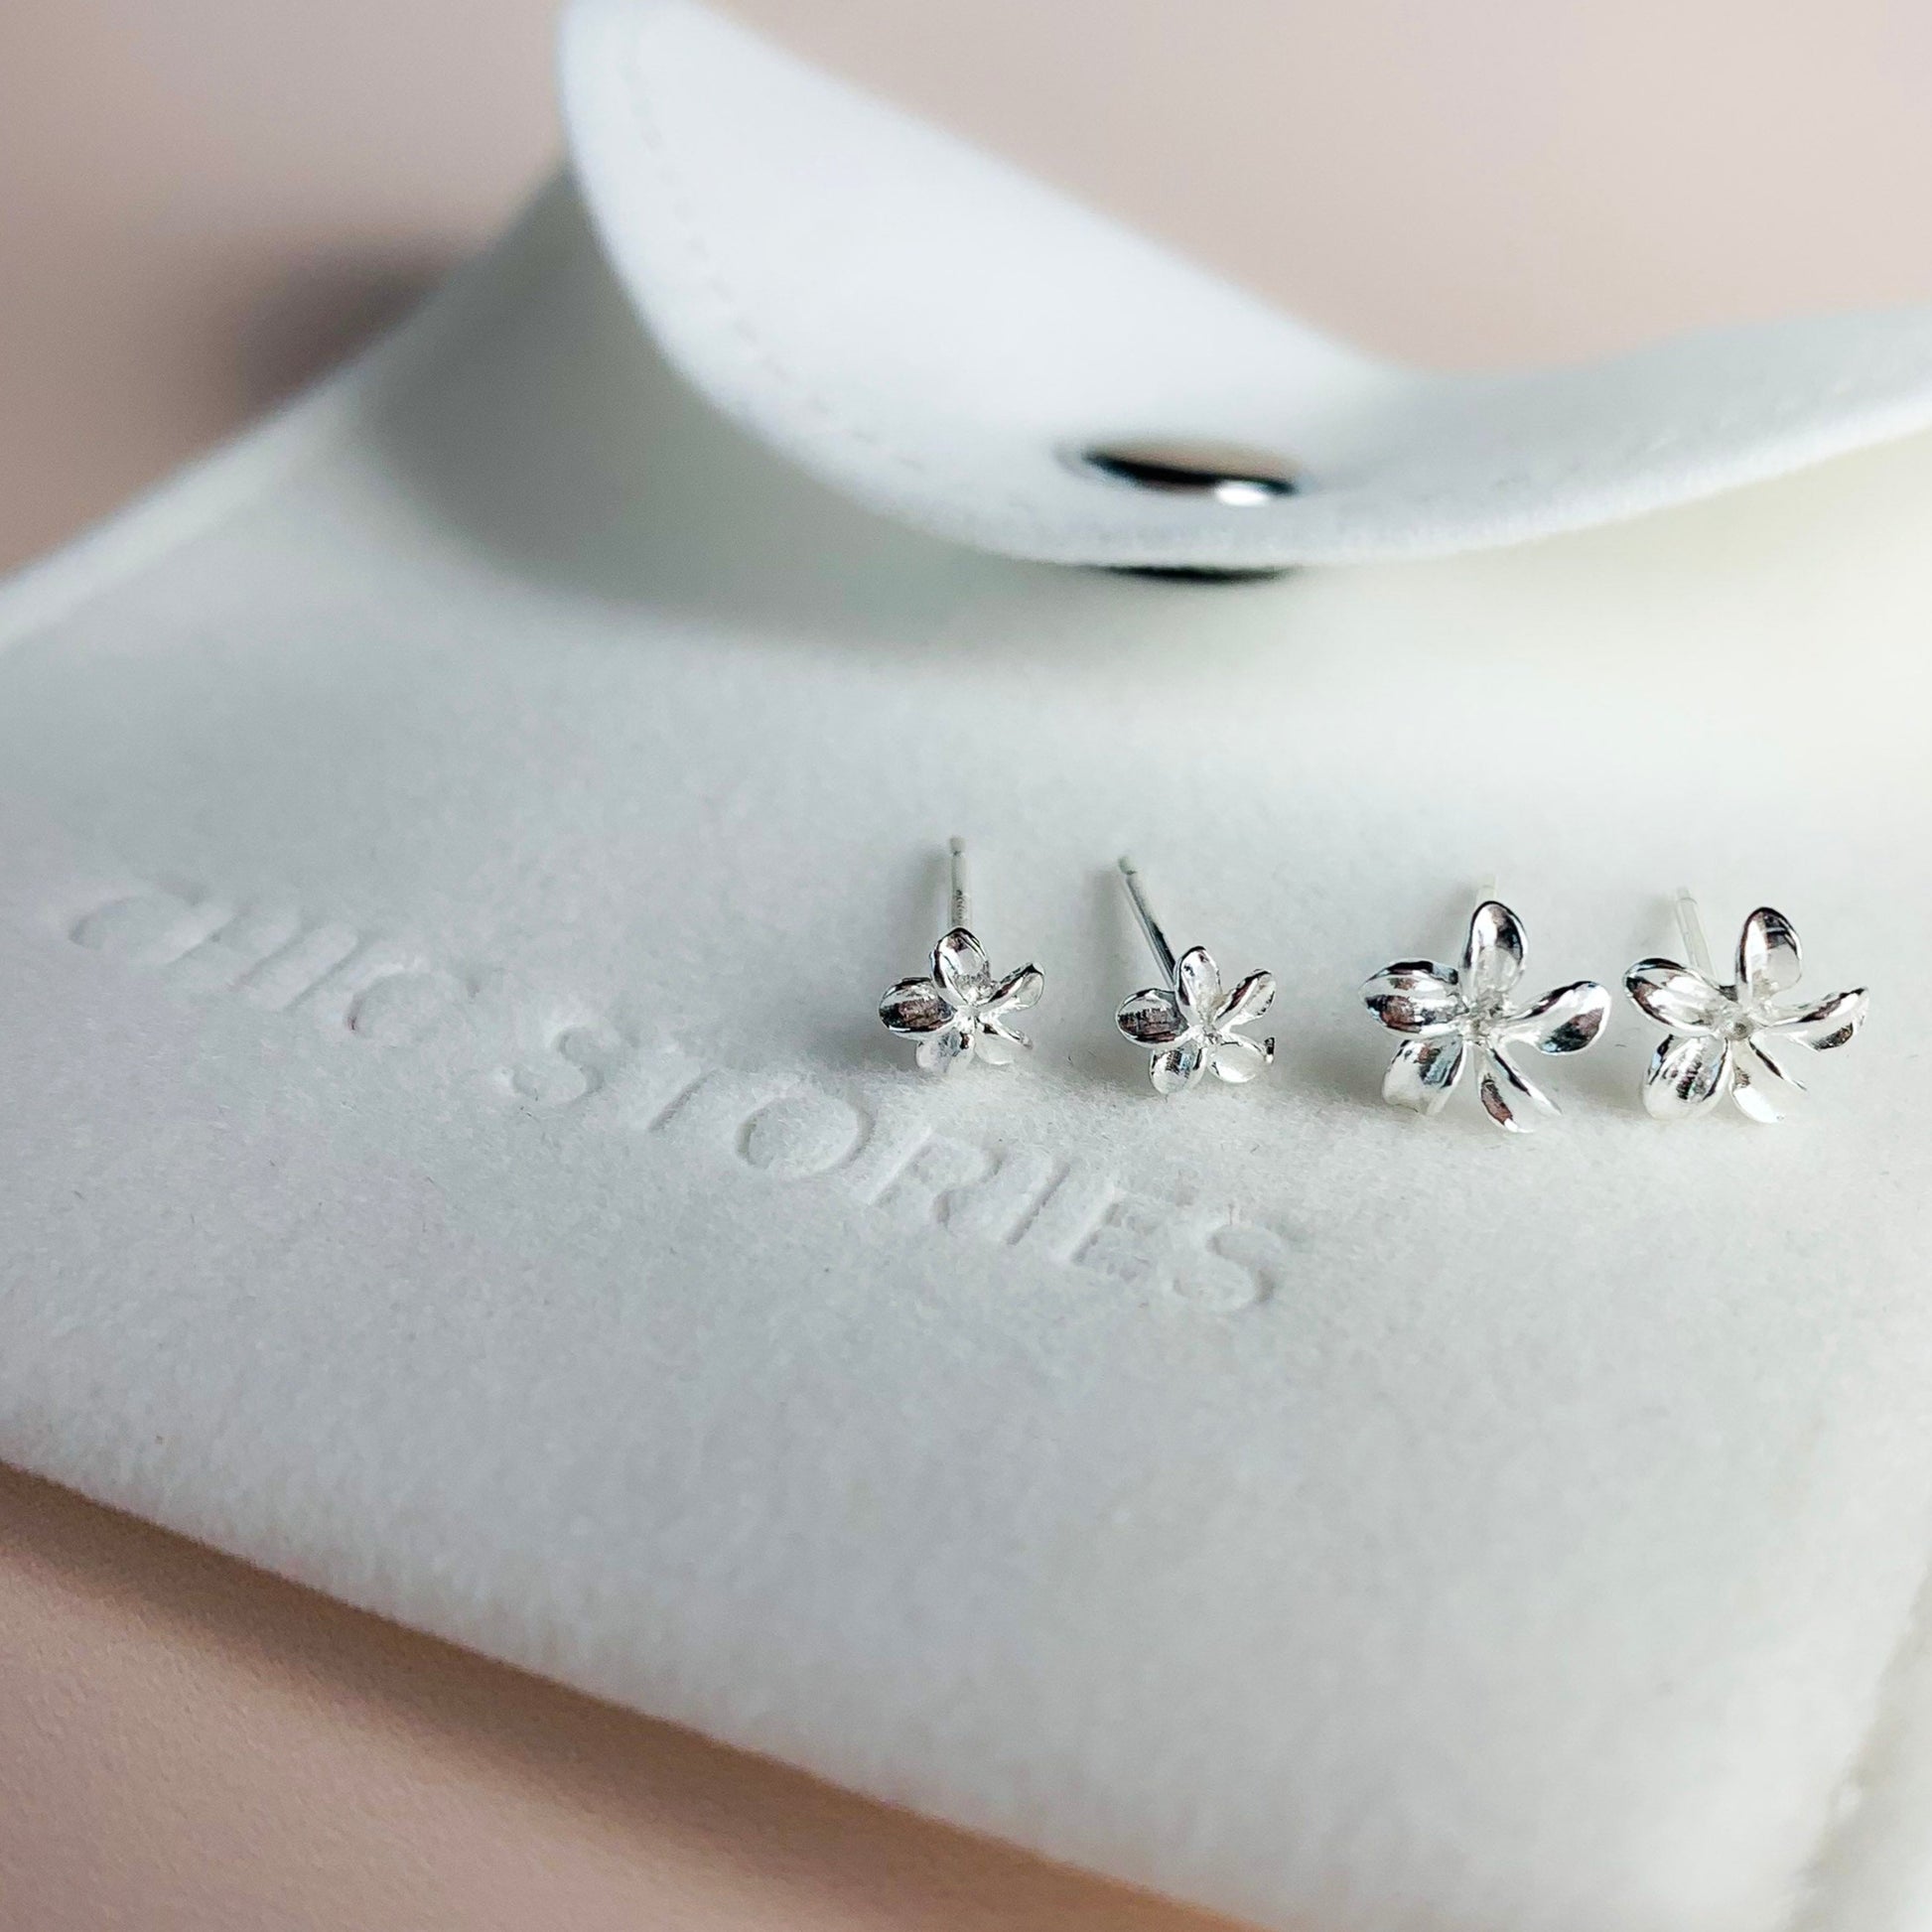 Two pairs of sterling silver flower stud earrings, in two different size options. They are sitting on a white felt jewellery pouch, embossed with the words Chic Stories